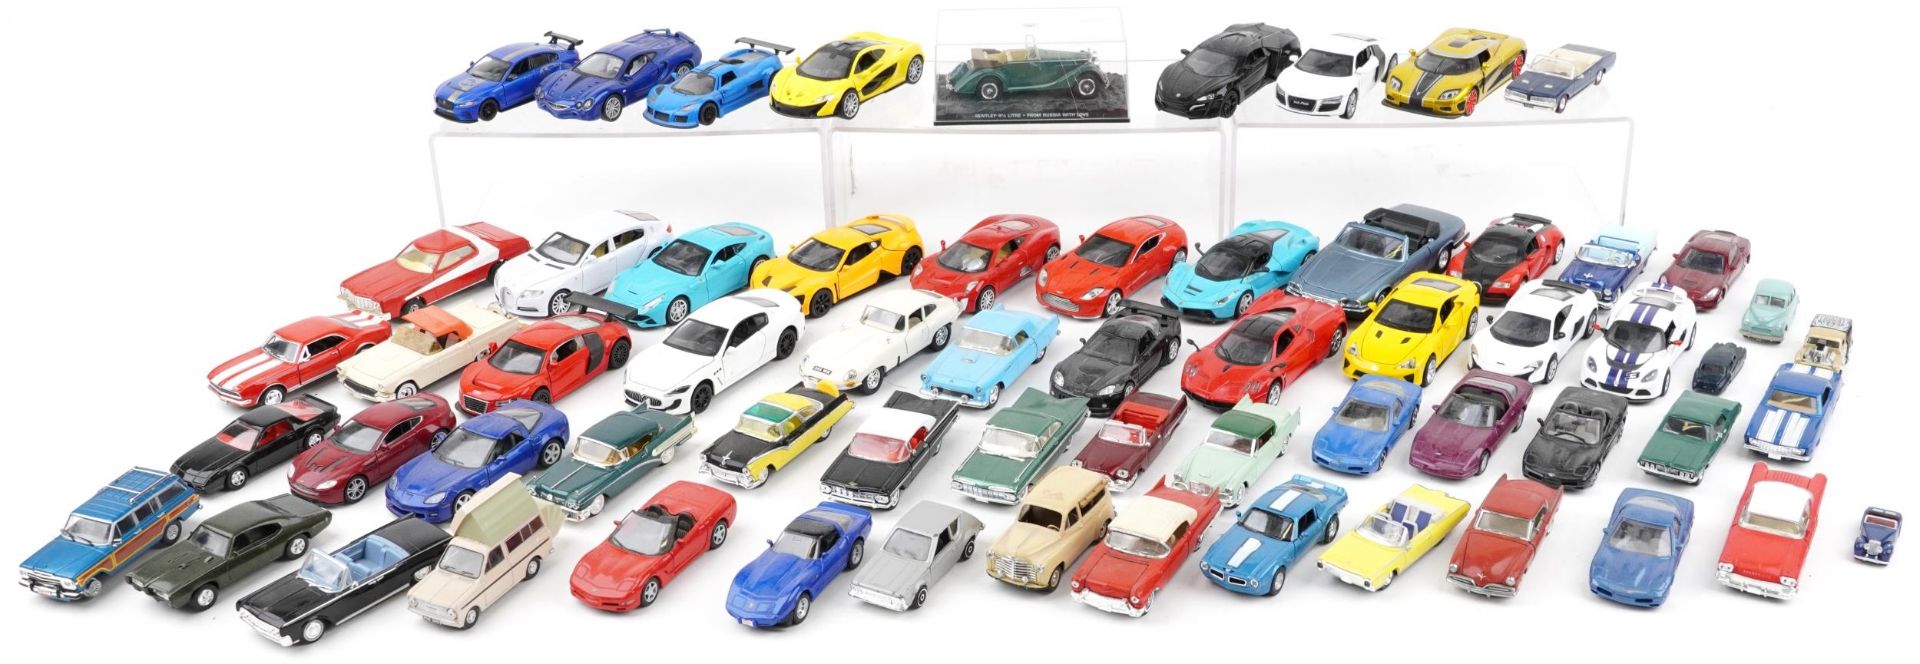 Vintage and later collector's vehicles, predominantly diecast, including Maisto, Ertl and Kinsmart